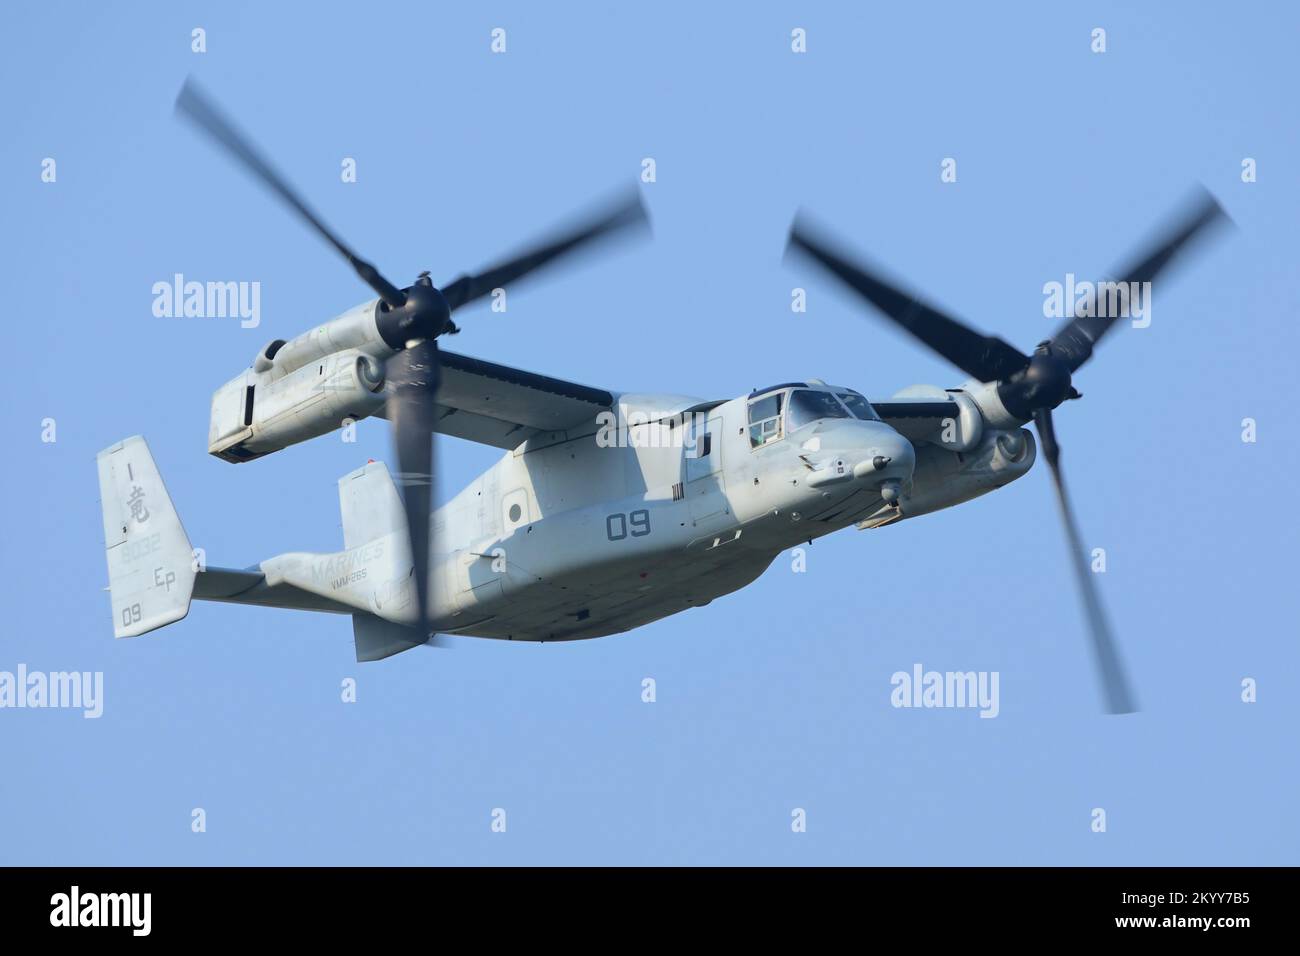 Kanagawa Prefecture, Japan - July 15, 2014: US Marine Corps Bell Boeing MV-22B Osprey tiltrotor military transport aircraft from VMM-265 Dragons. Stock Photo